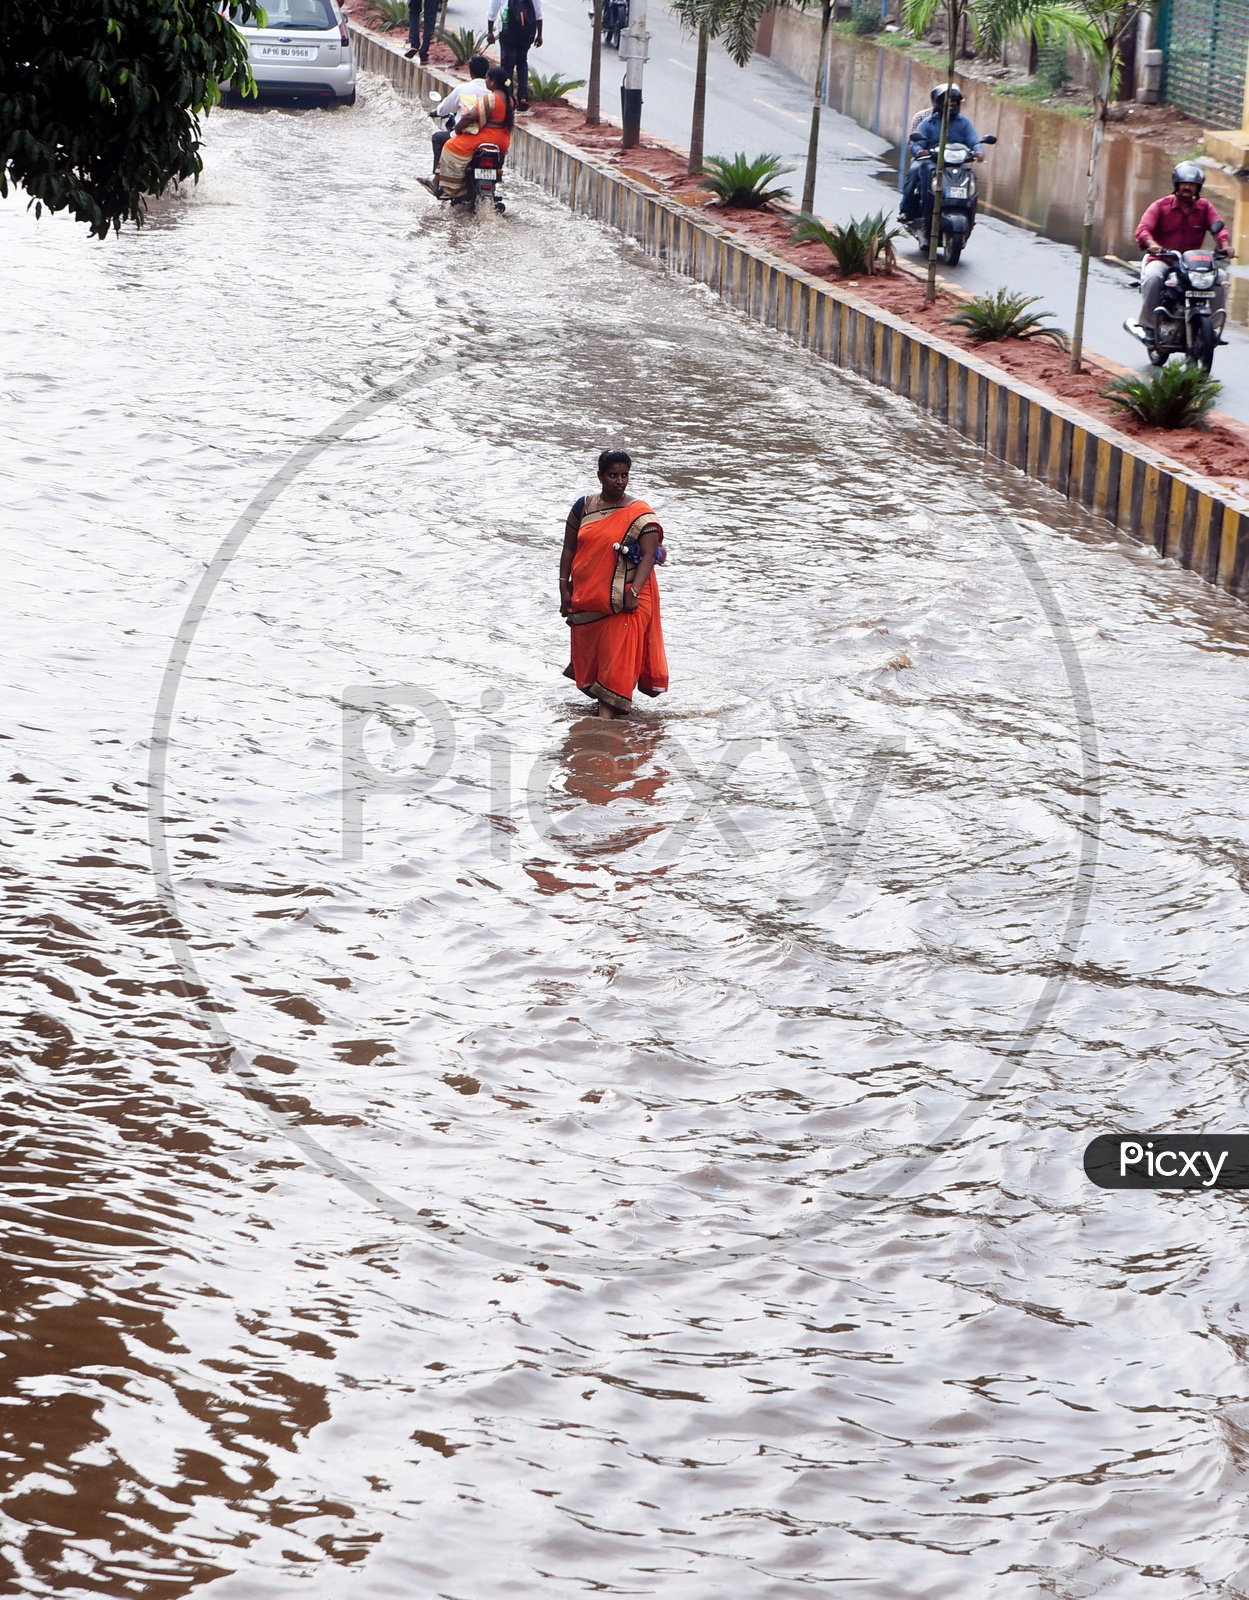 A woman walking on the flooded road